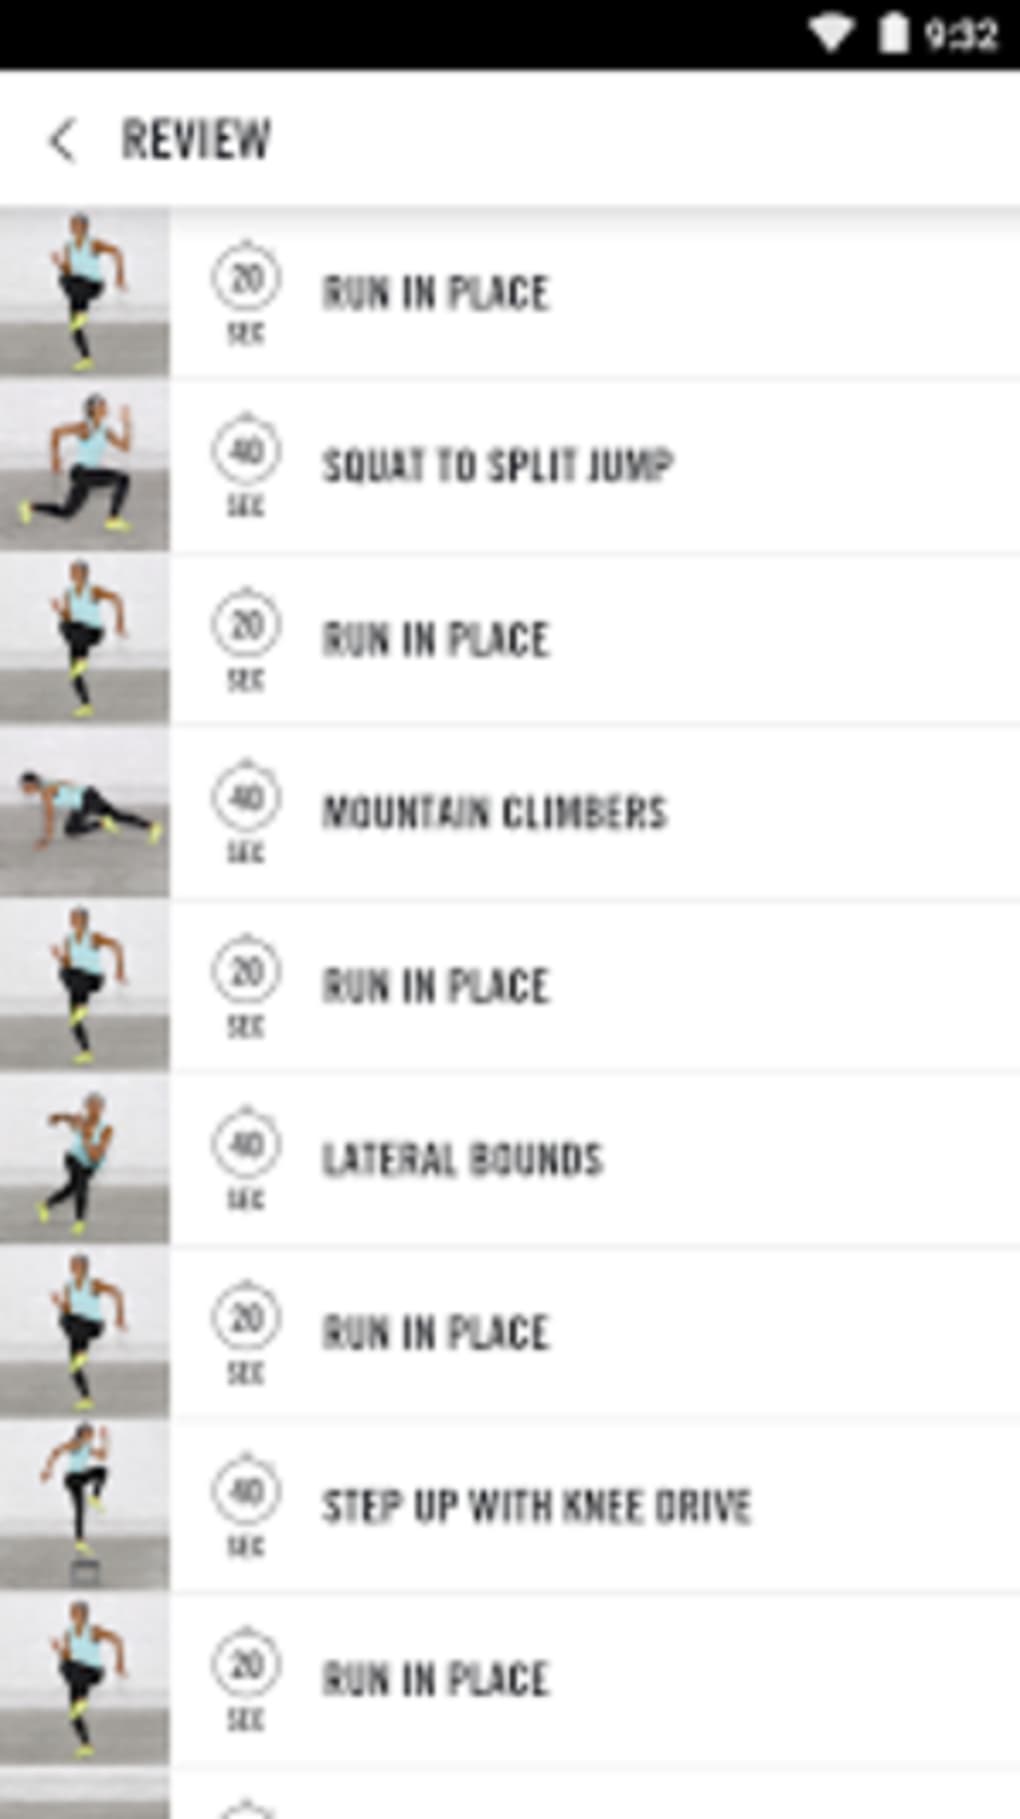 Recepción Descenso repentino La base de datos Nike Training Club - Home workouts fitness plans APK for Android - Download